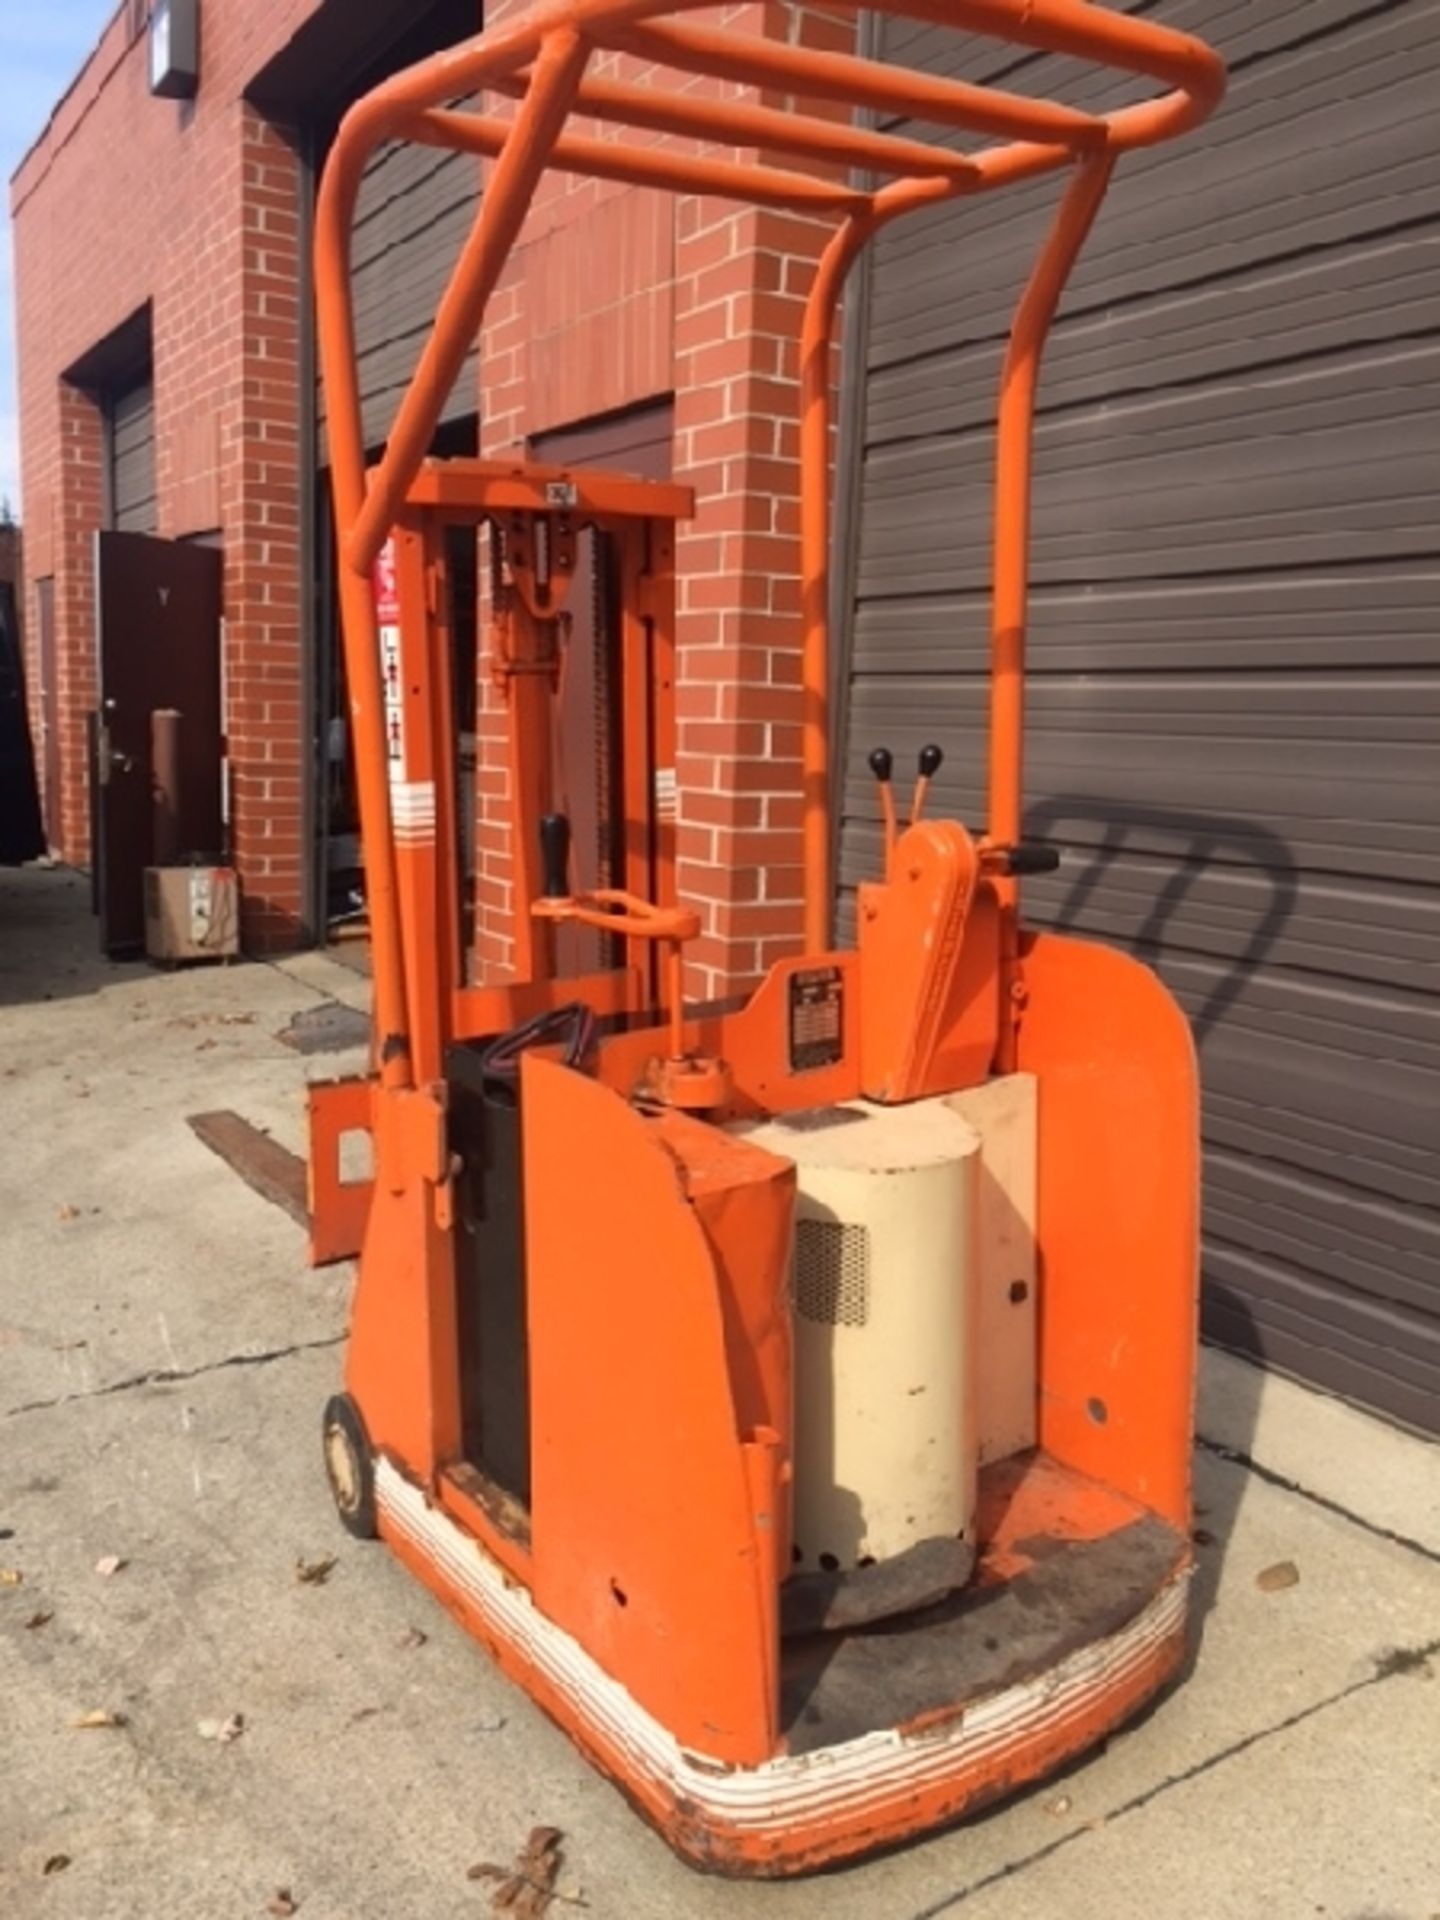 Automatic/Yale forklift 9 foot lift 2000lb. Cap 24 volt battery 110v charger Compact design - Image 3 of 4